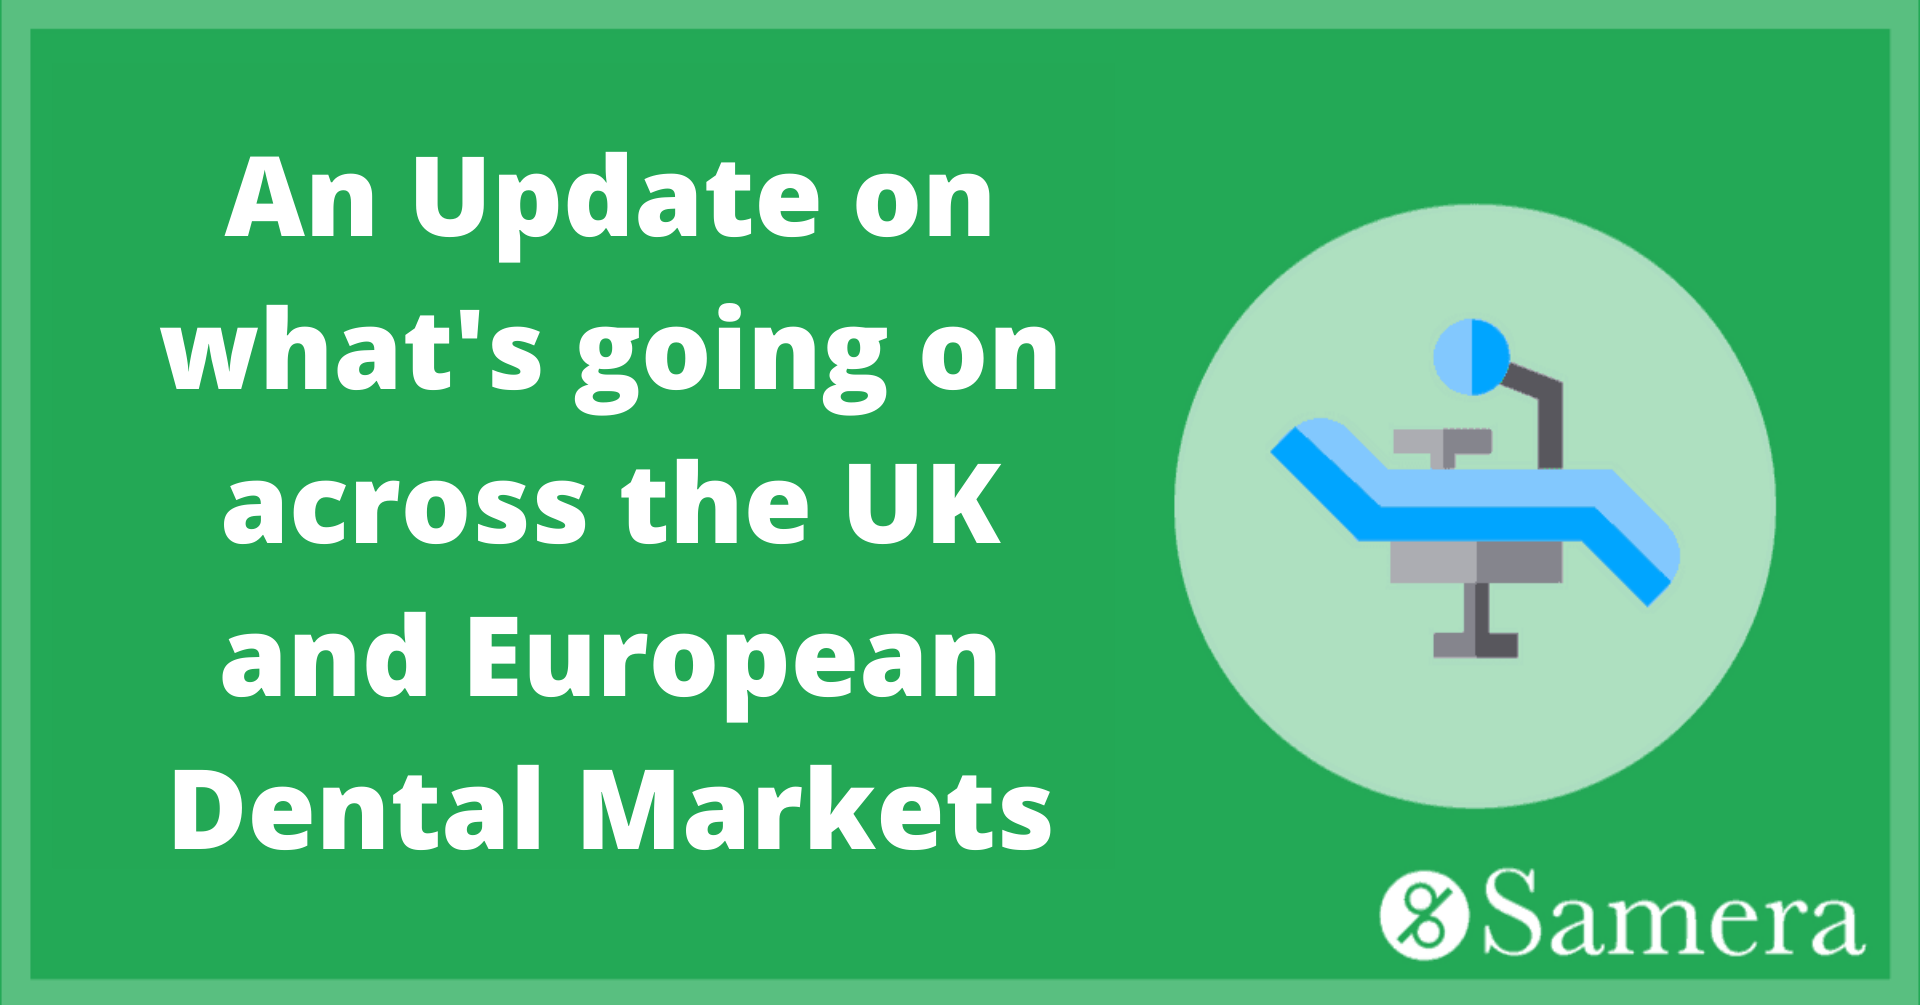 An Update on what's going on across the UK and European Dental Markets